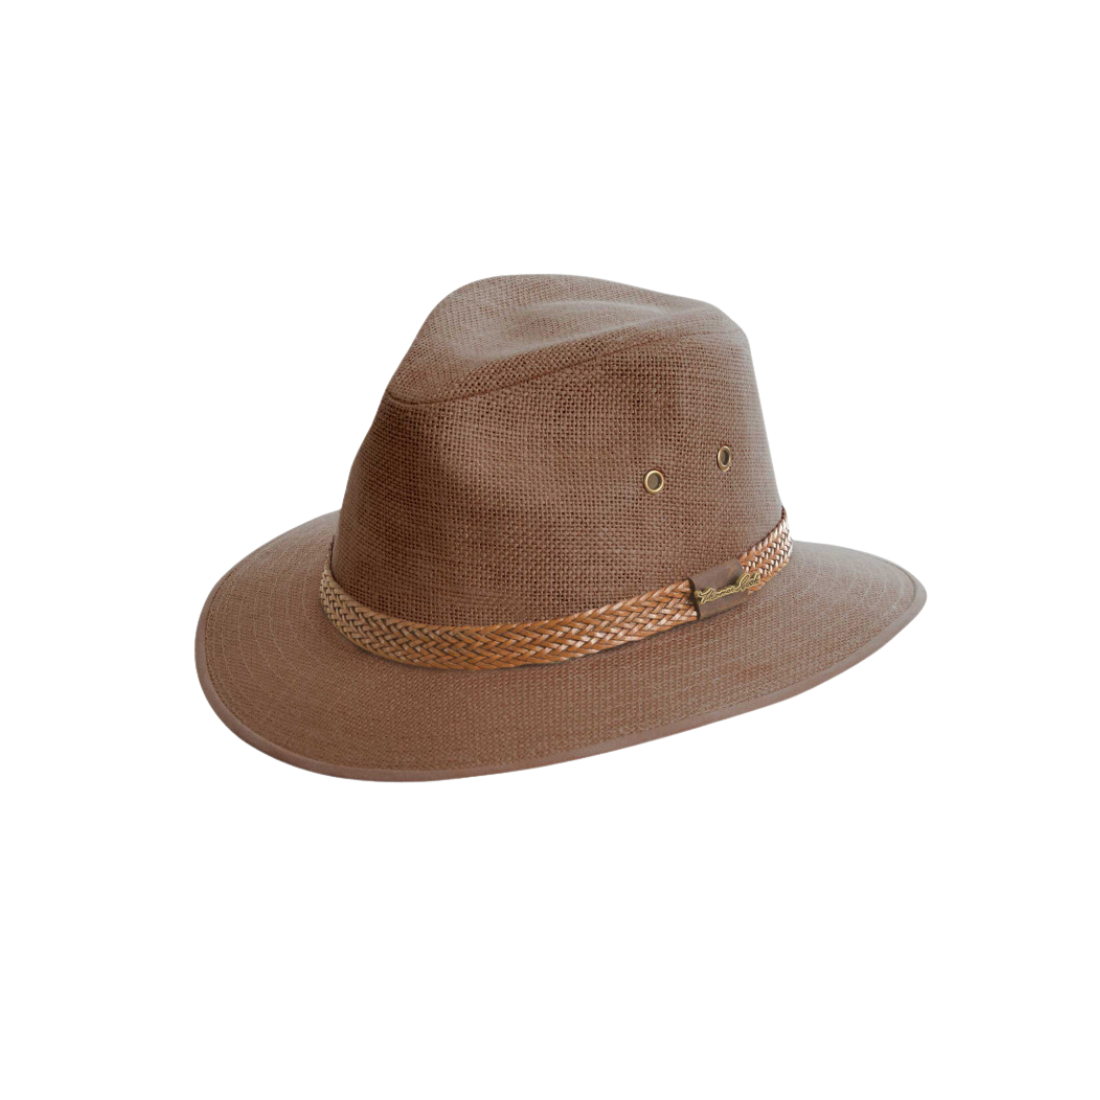 Broome Hat Brown Lar L Brown Mens Hats, Scarves, Beanies by Thomas Cook | The Bloke Shop